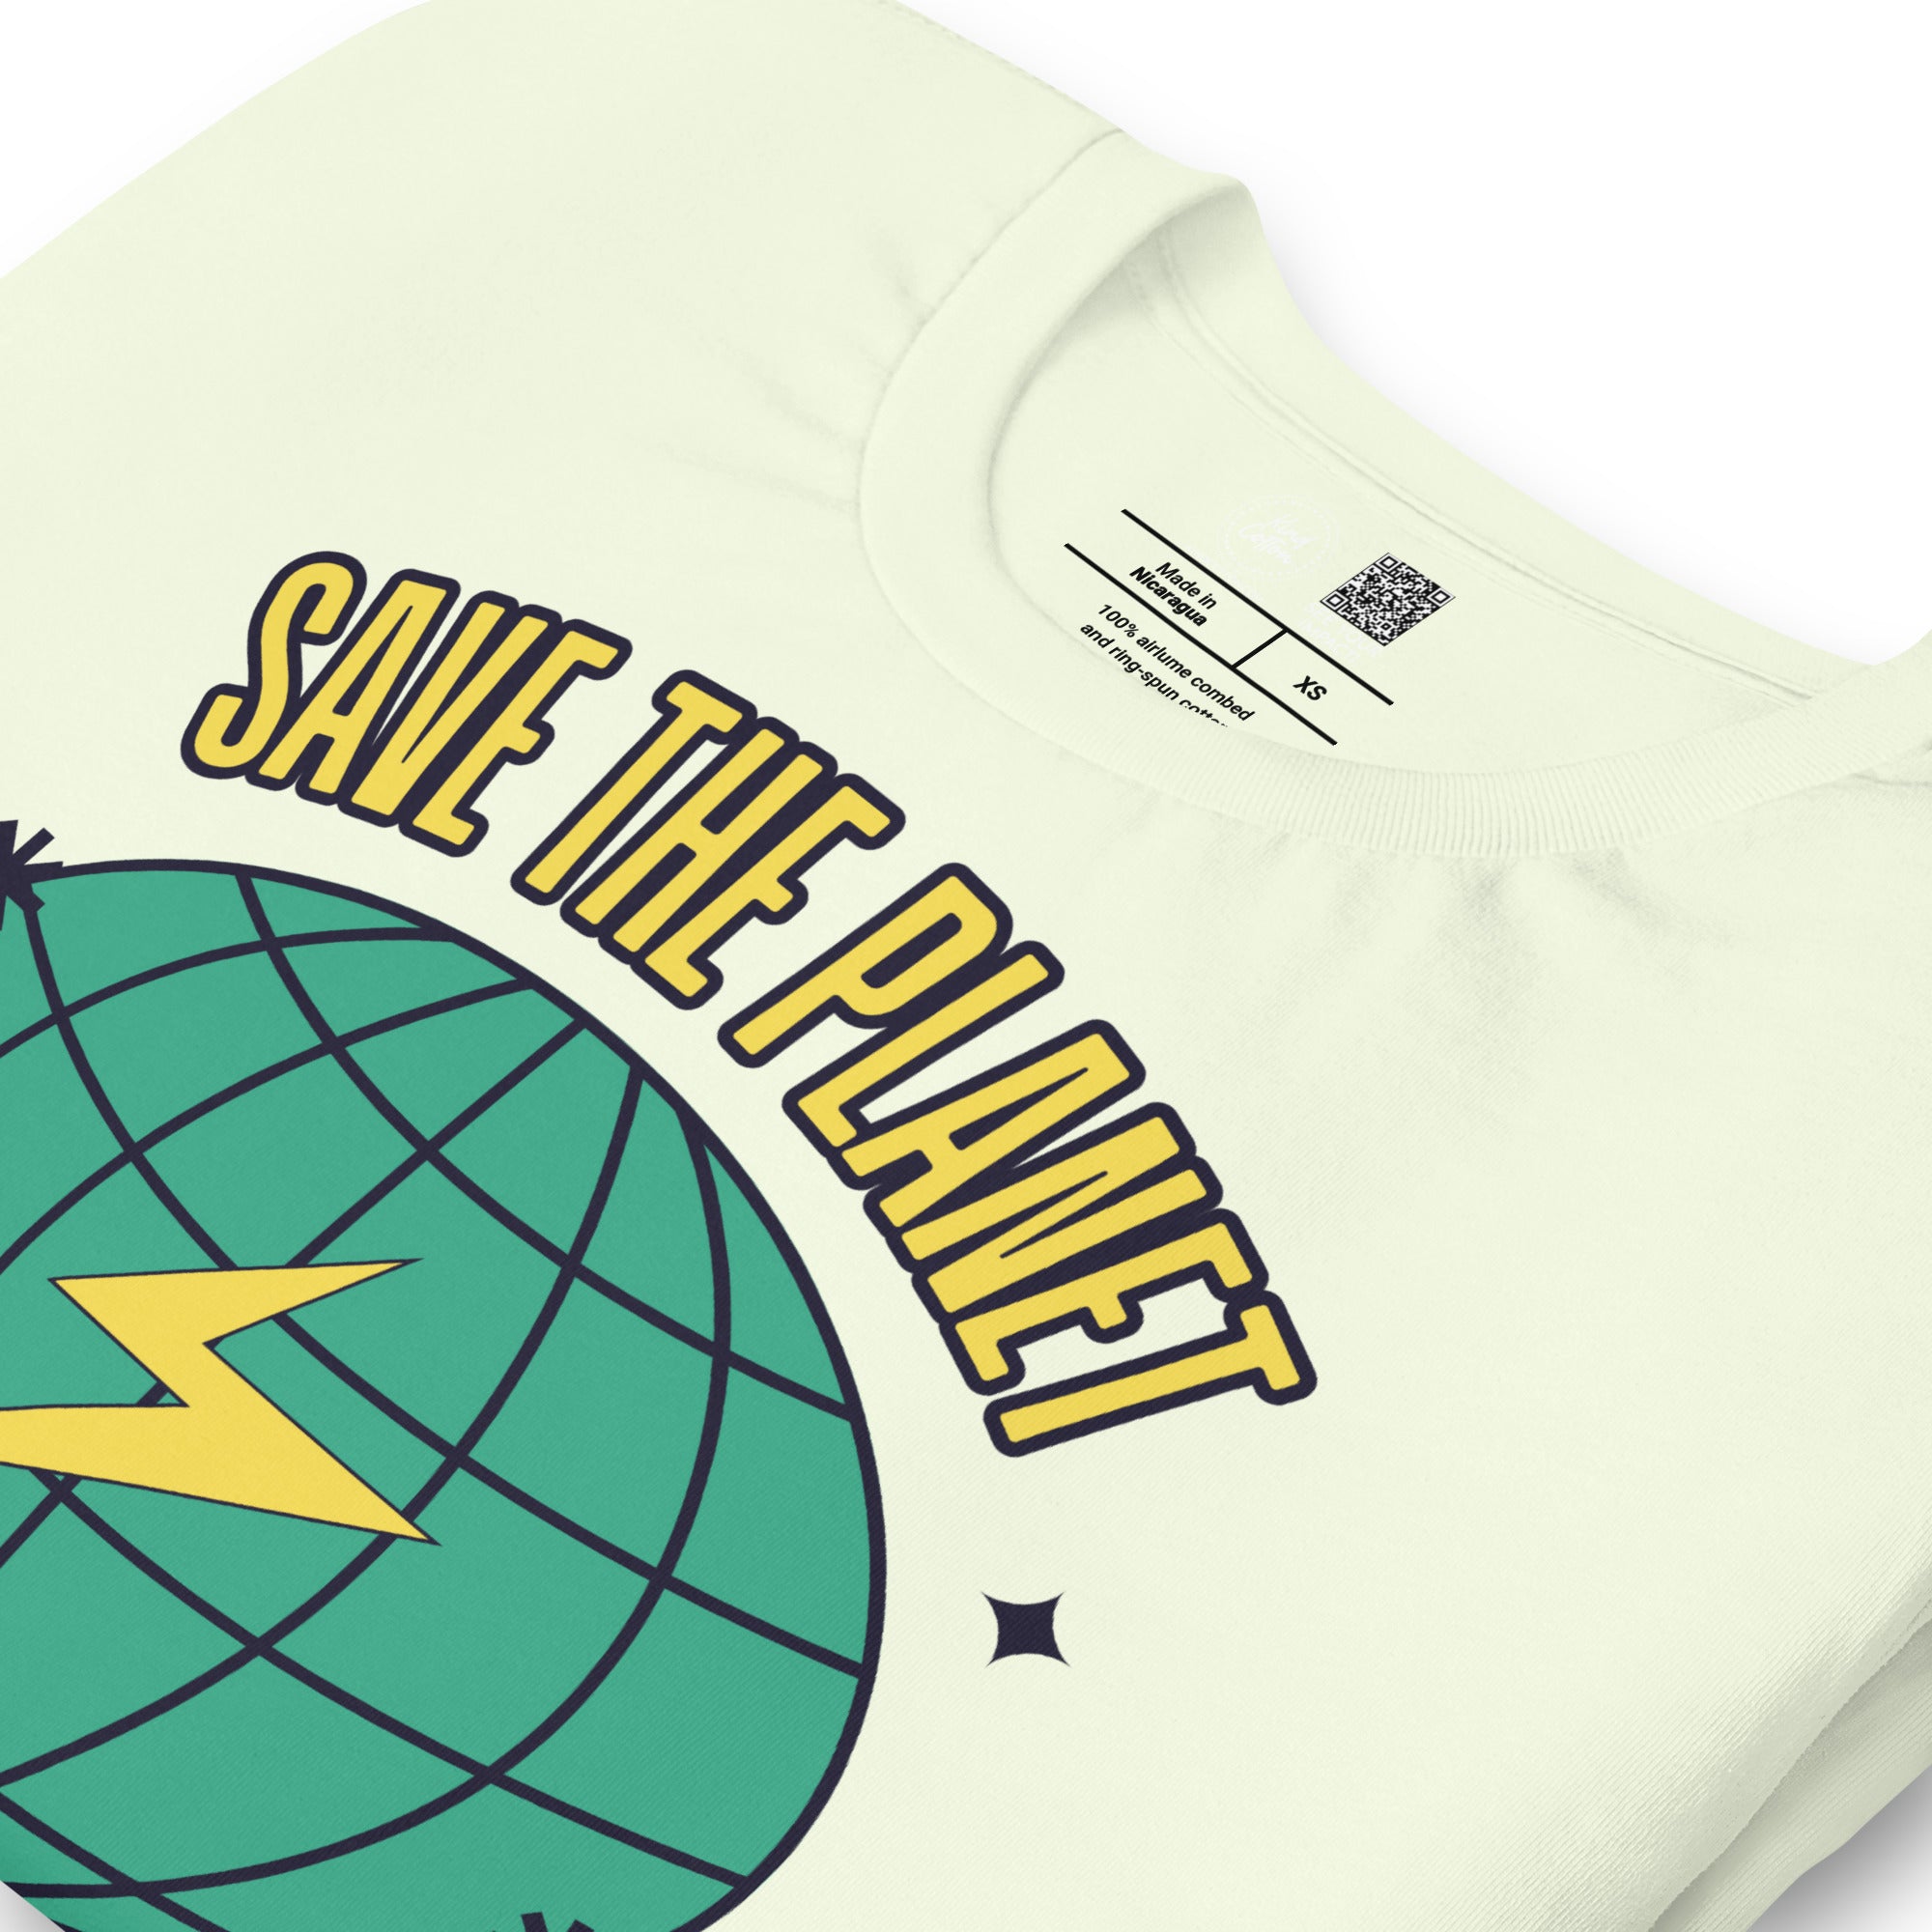 Save the Planet Classic Tee